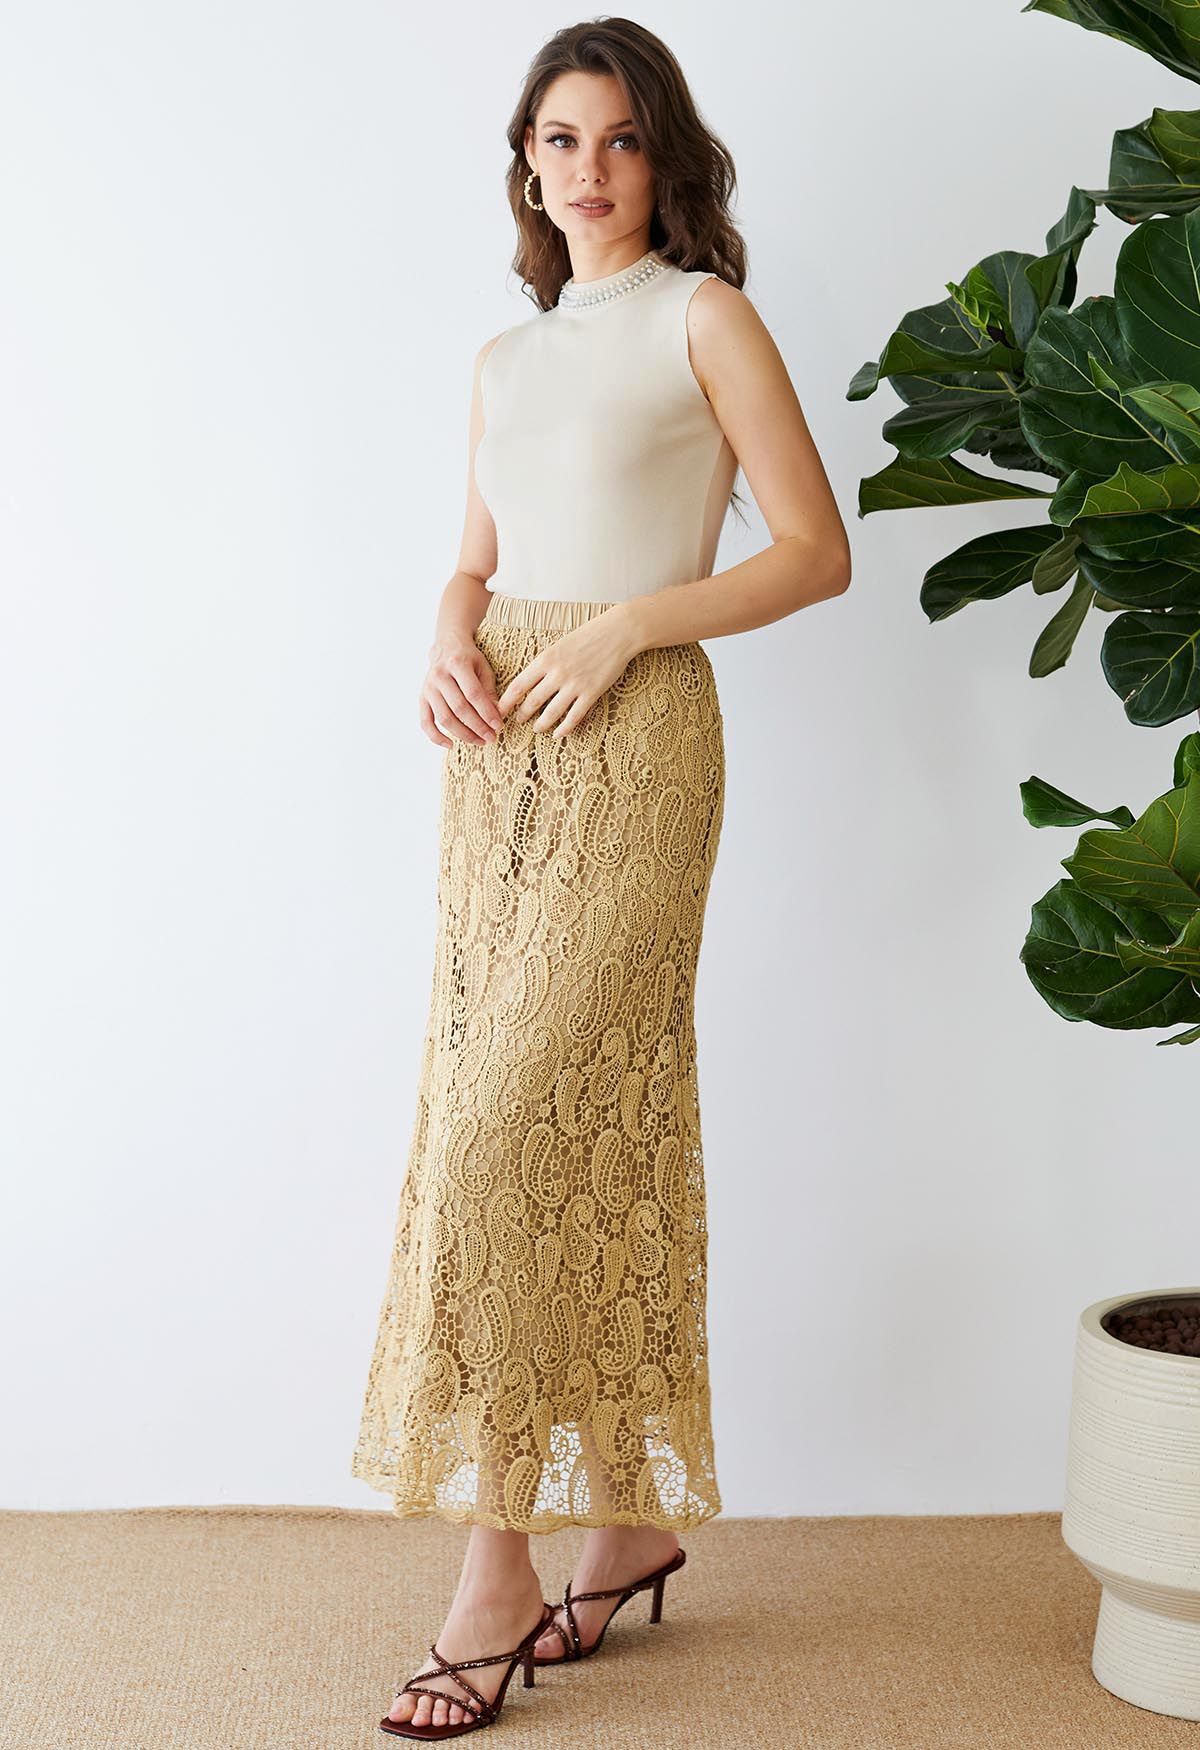 Pearl Embellished Mock Neck Sleeveless Knit Top in Sand